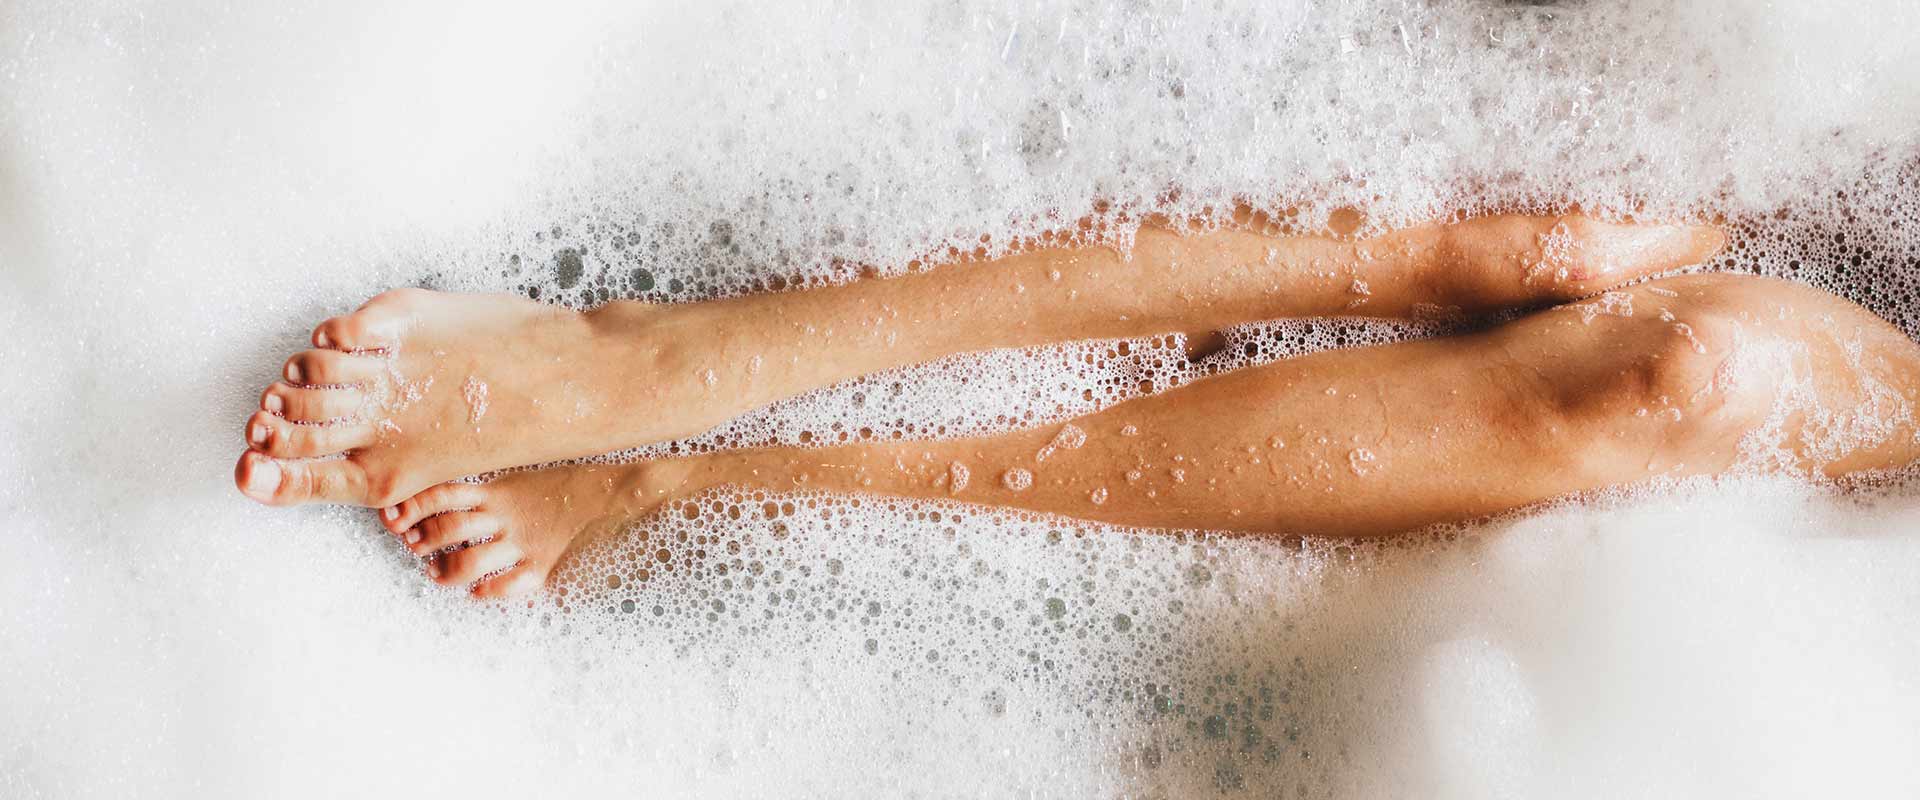 The legs of a woman peek out from a bubble bath and the bubbles surround her completely.